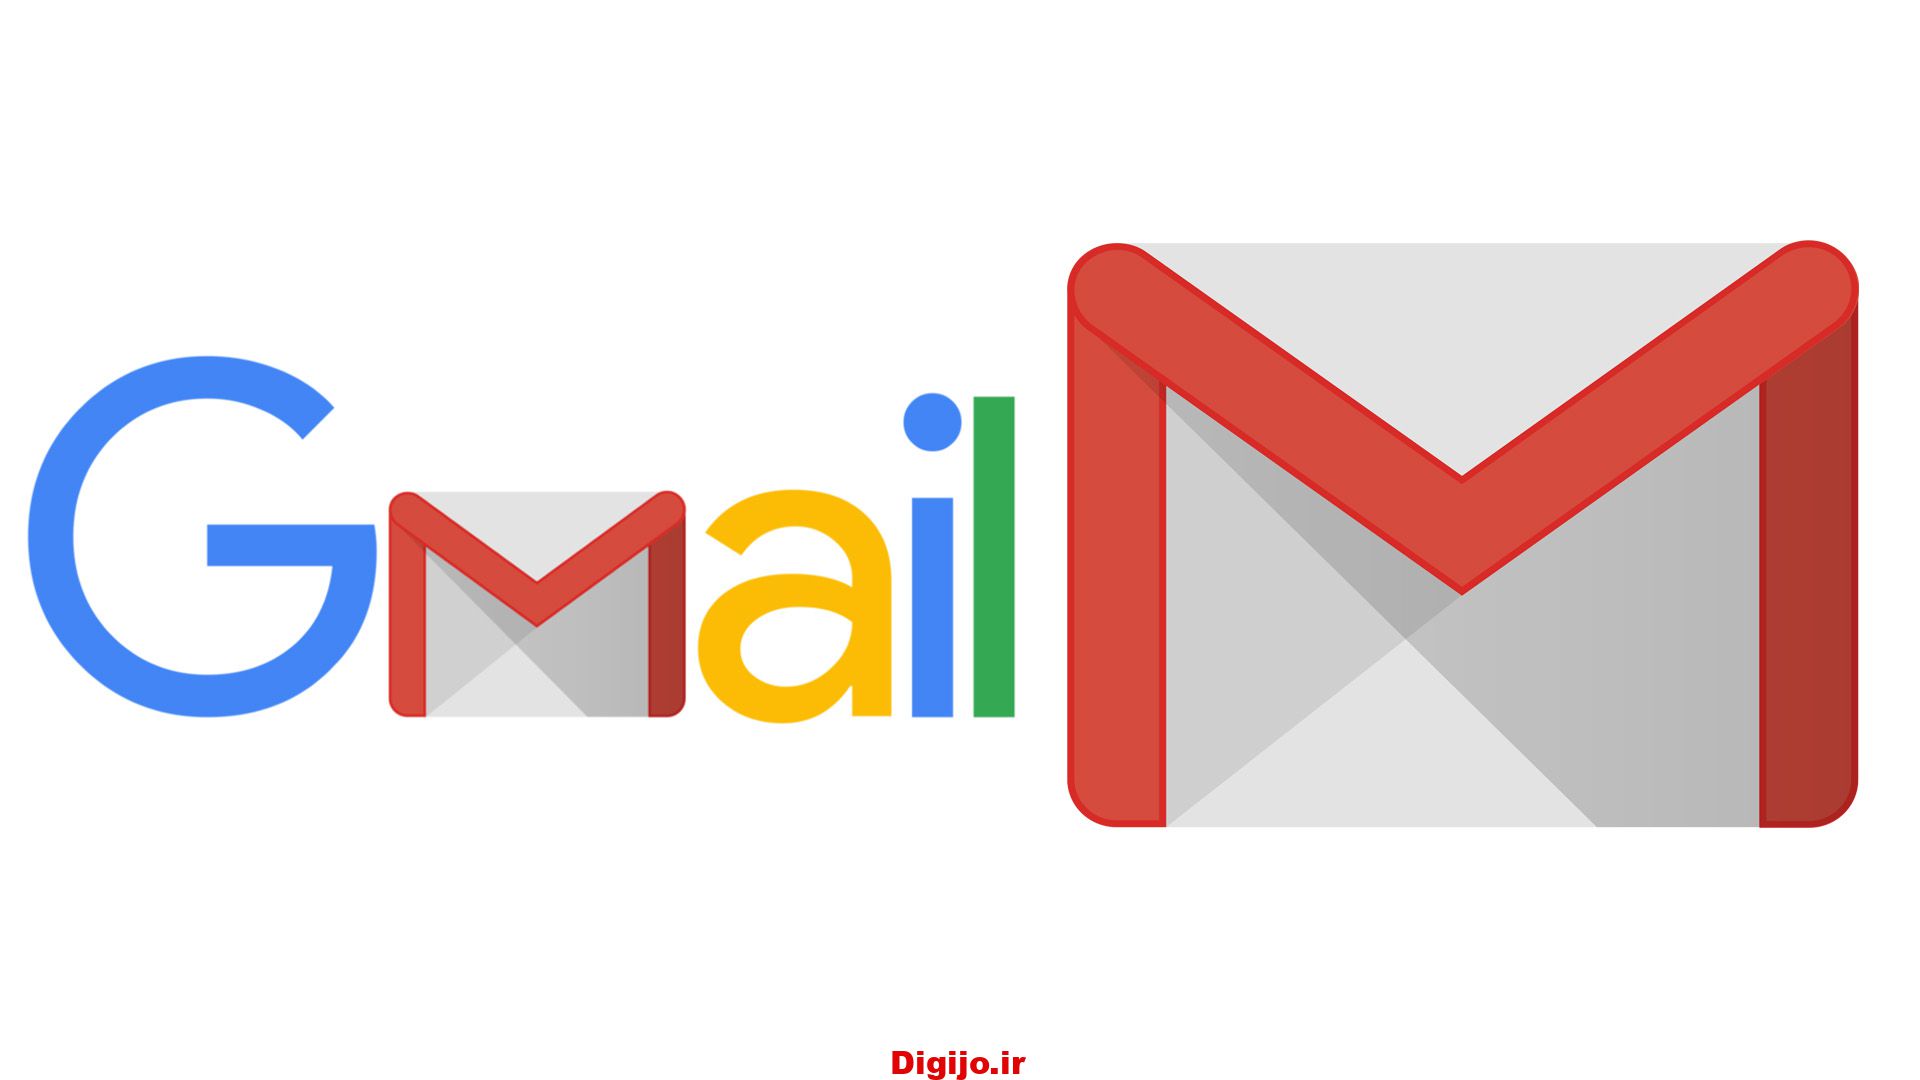 Gmail fully altered mail, and Google continues to enhance - Finance Rewind